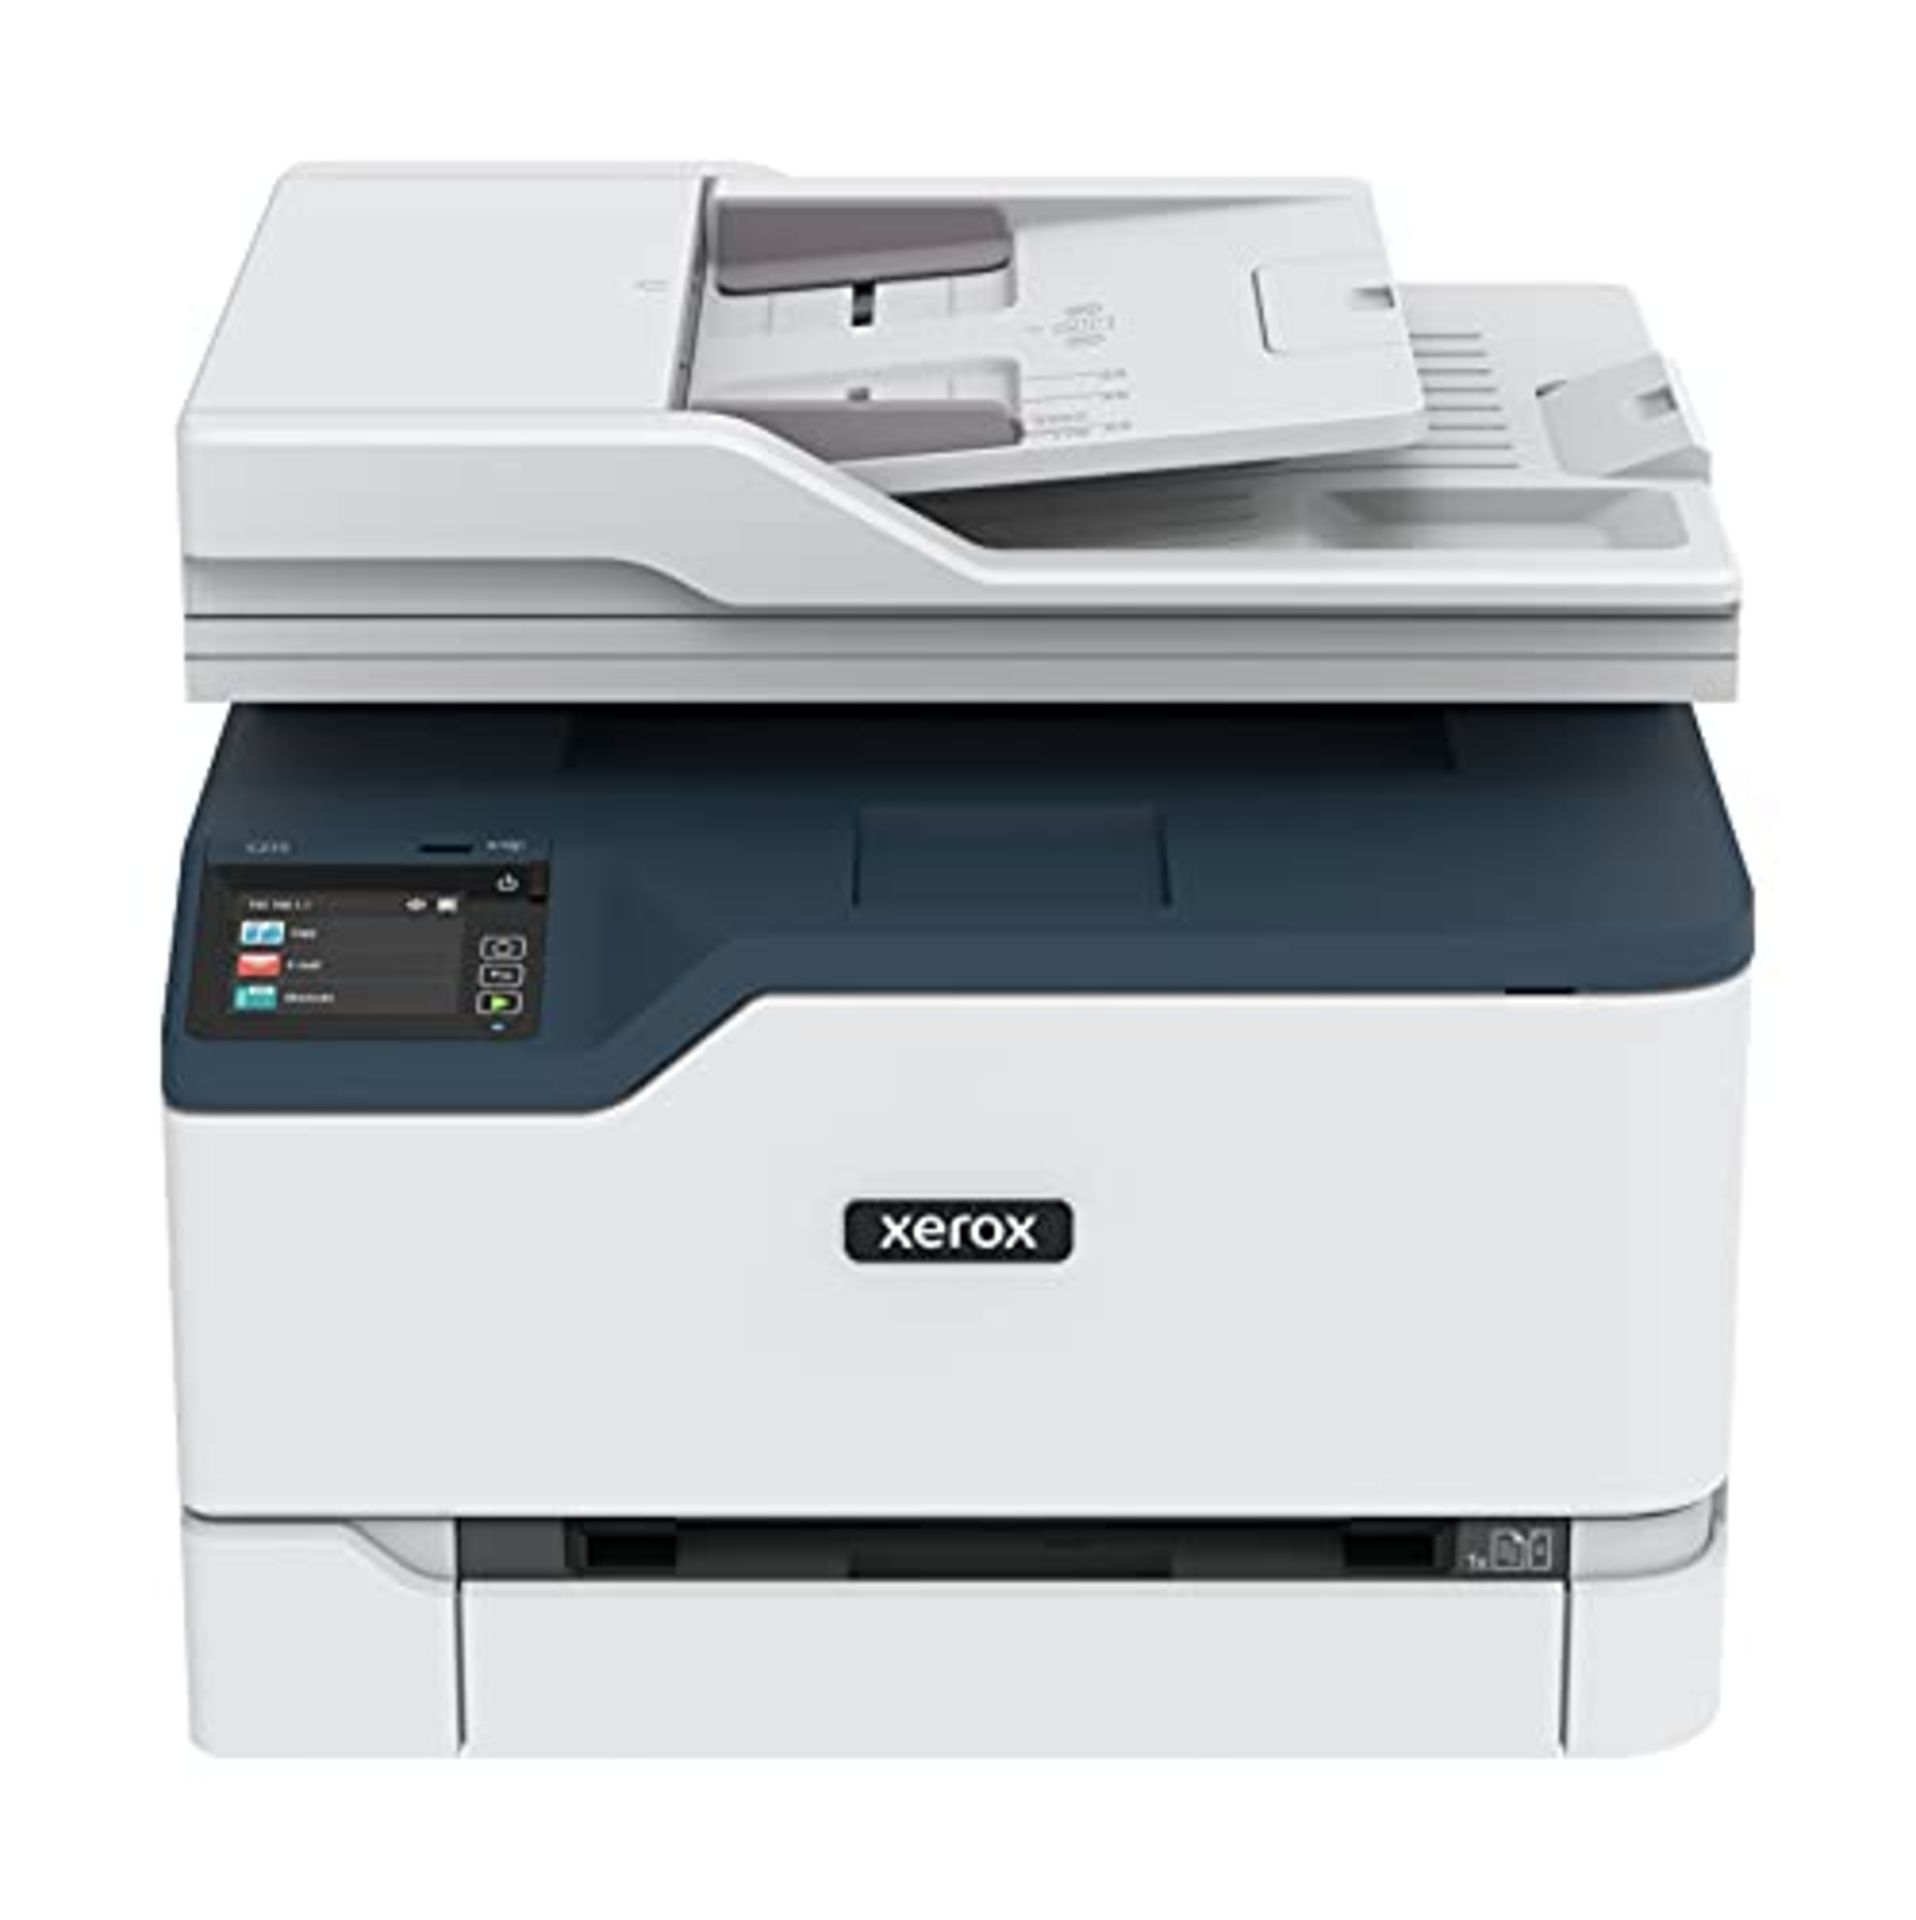 RRP £405.00 Xerox C235 Colour Multifunction Printer, Print/Scan/Copy/Fax, Laser, Wireless, All In